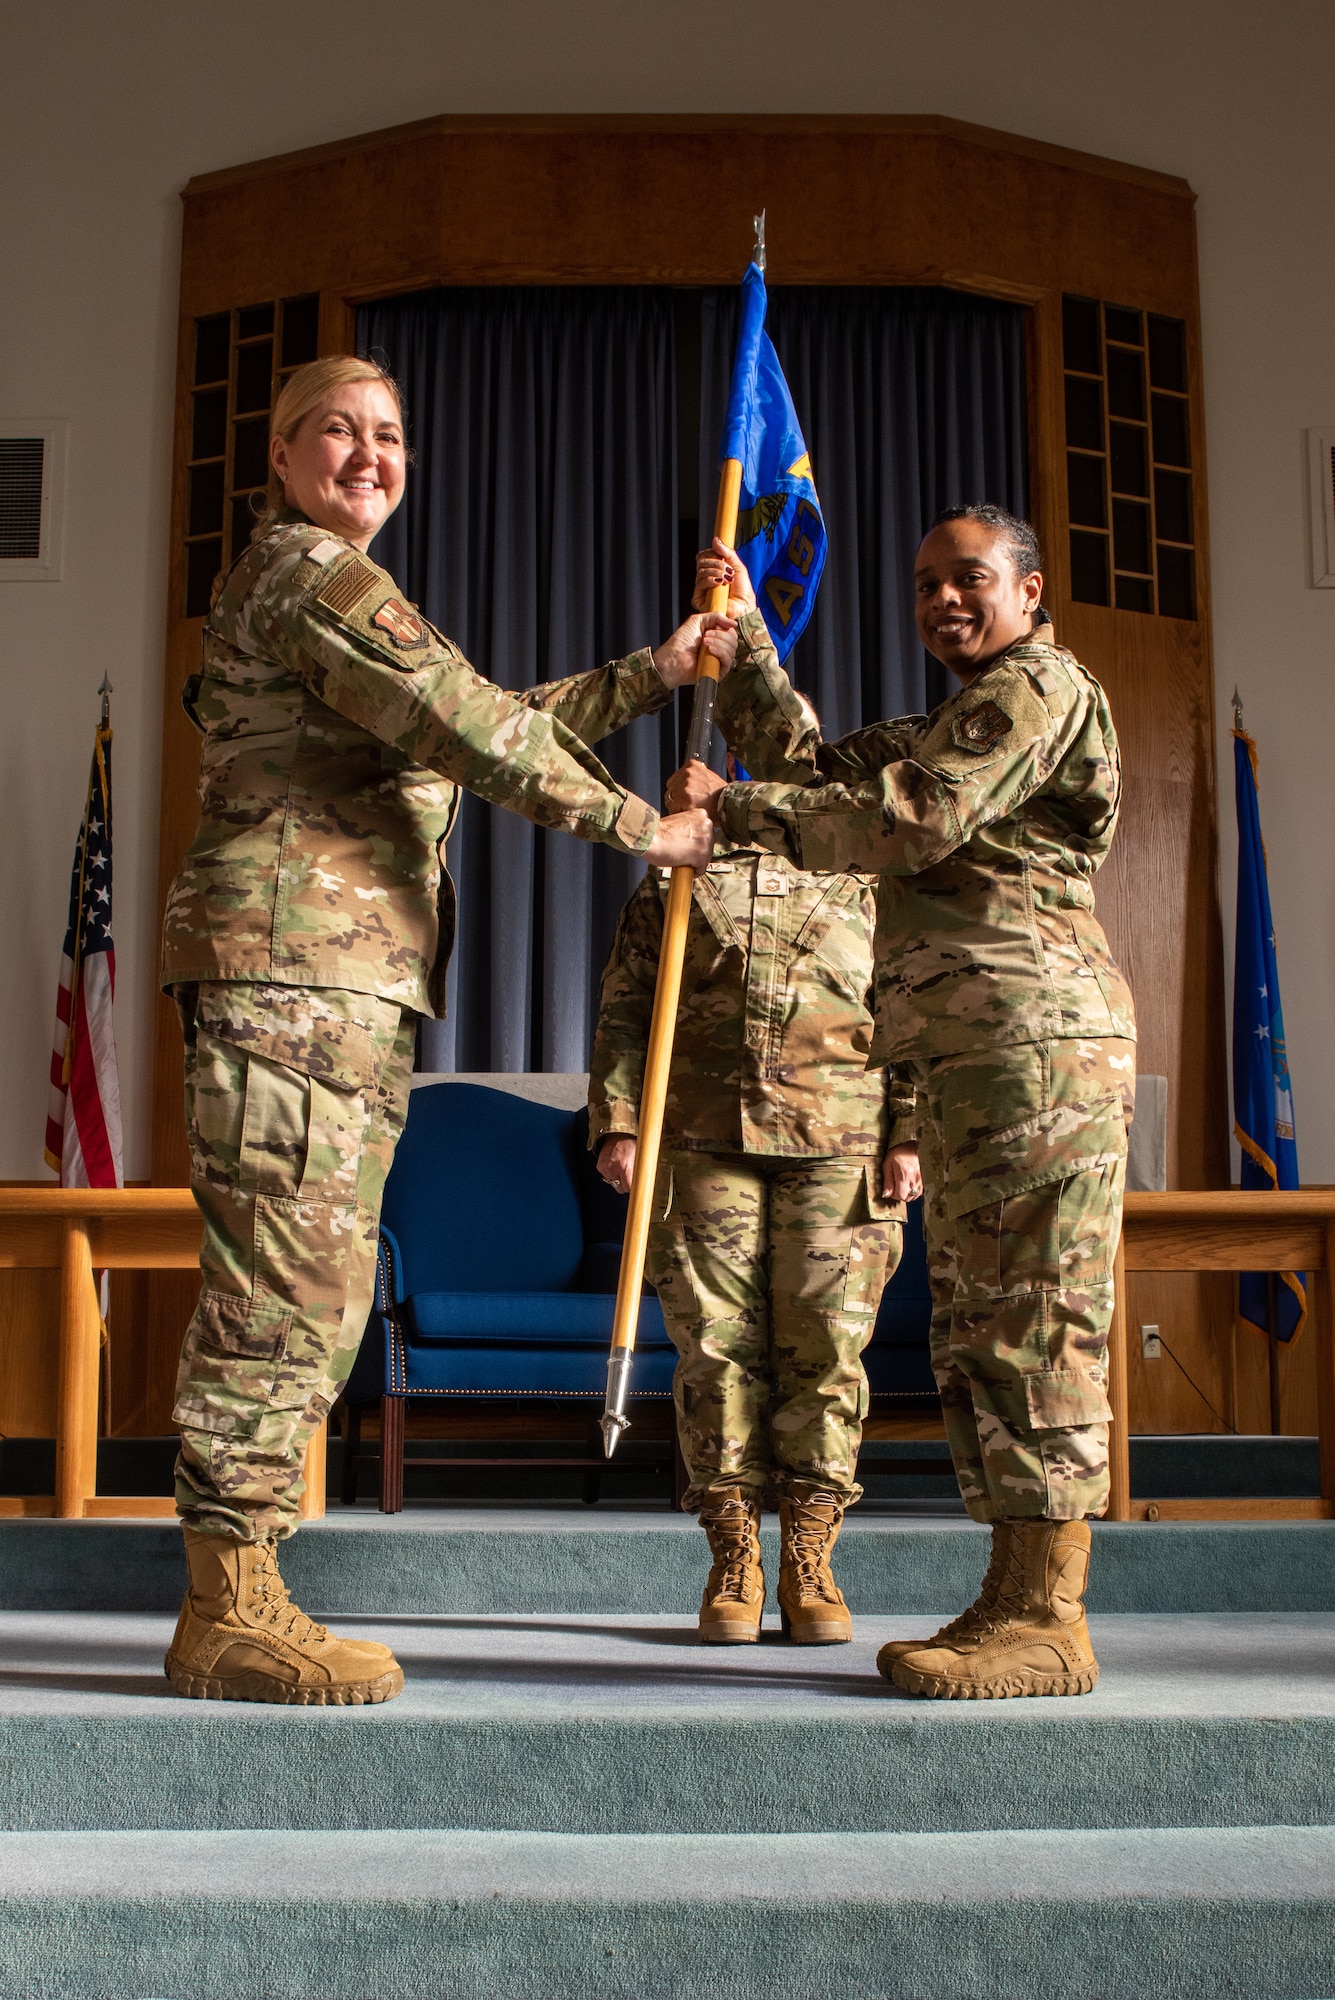 Col. Brande Newsome accepts the guidon flag of the 914th Aeromedical Staging Squadron, thereby taking command of the unit.